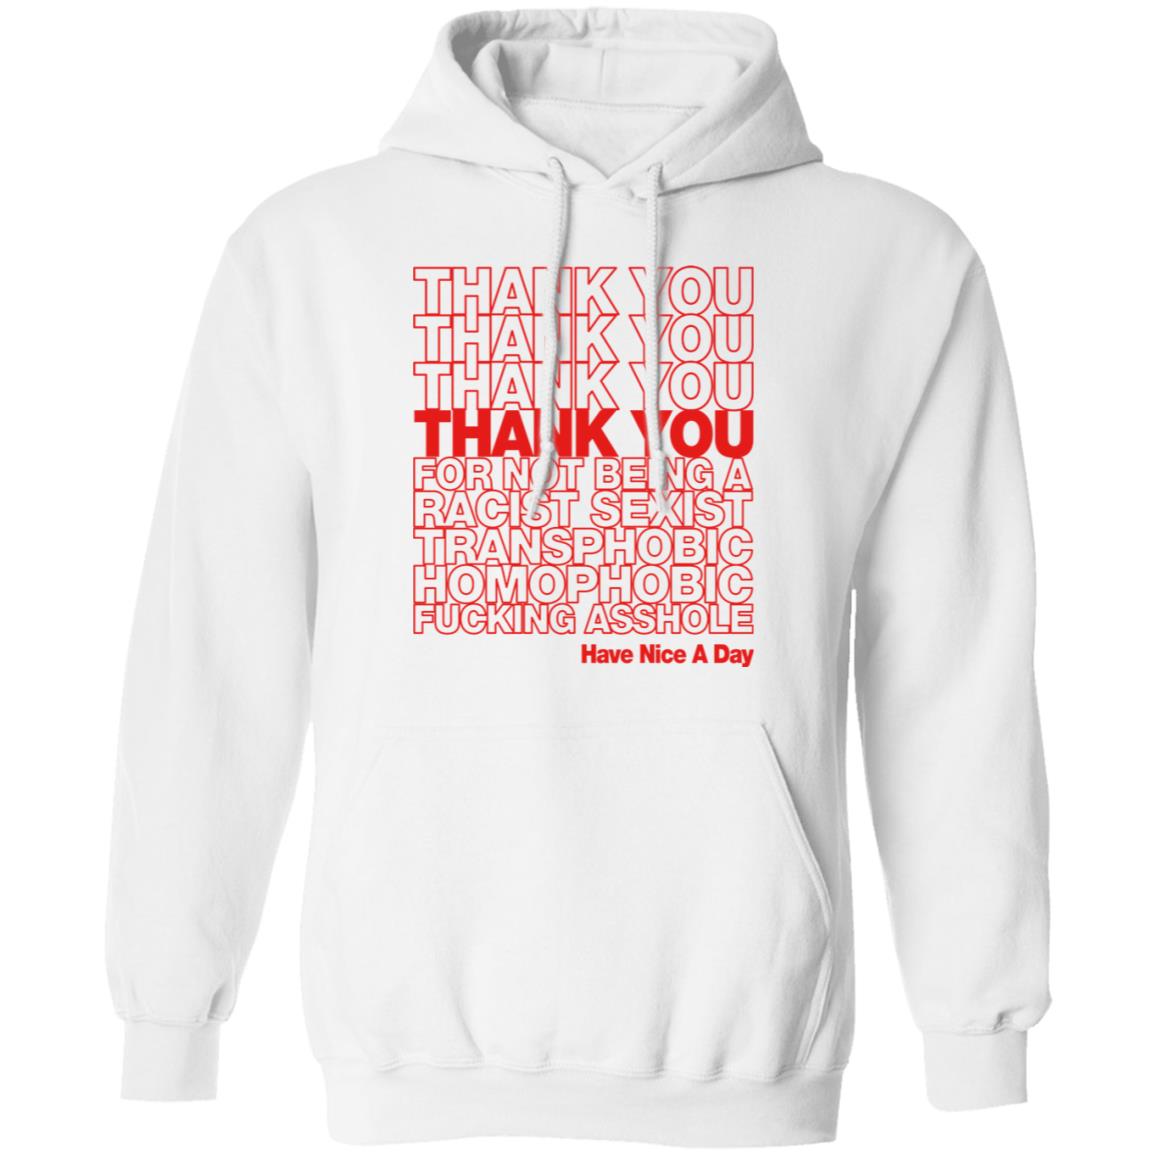 Thank You For Not Being A Racist Sexist Transphobic Homophobic Hoodie